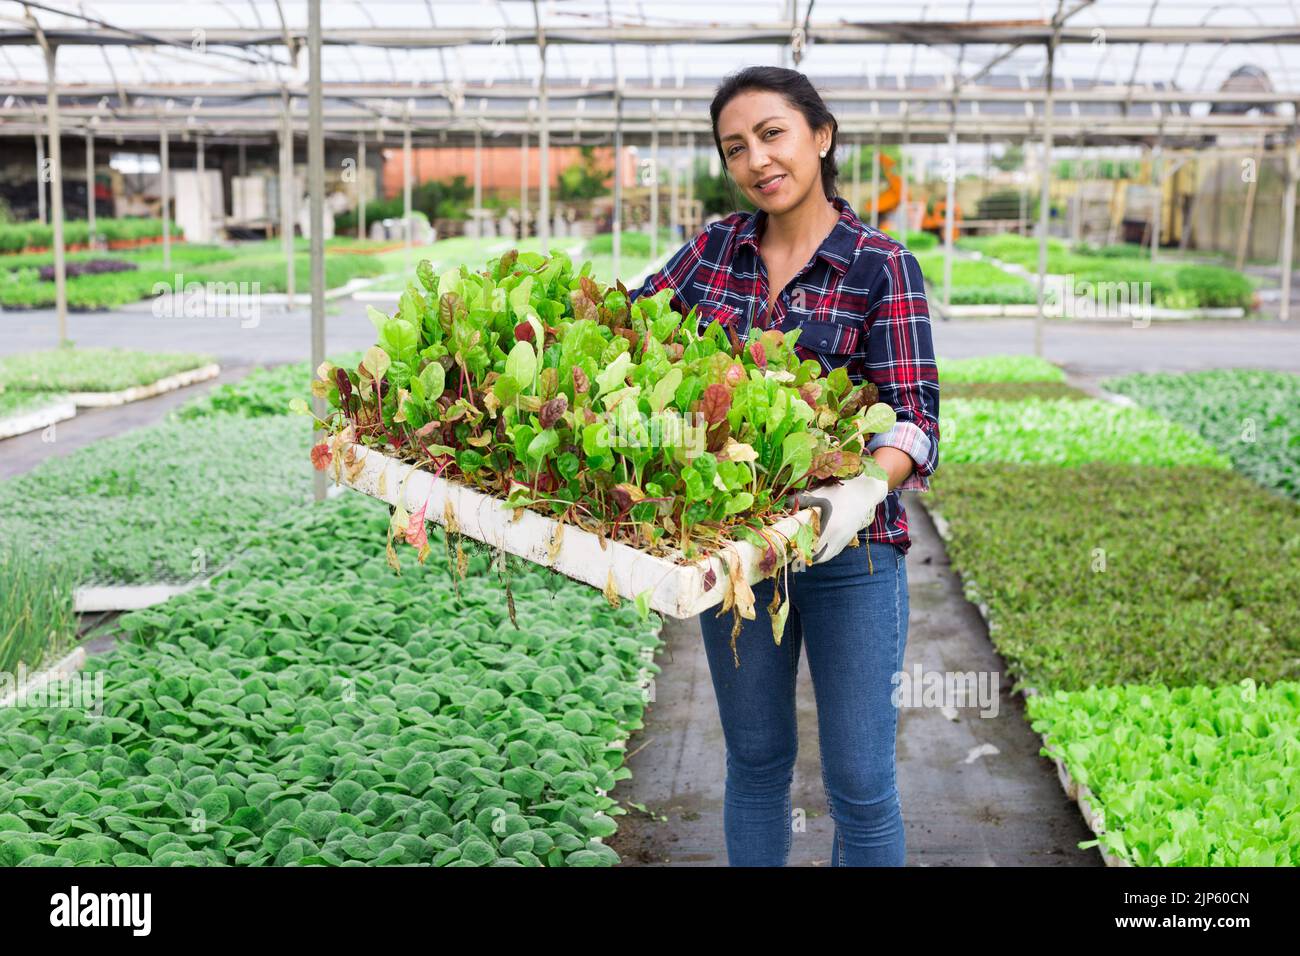 Female farmer drags box with spinach sprouts Stock Photo